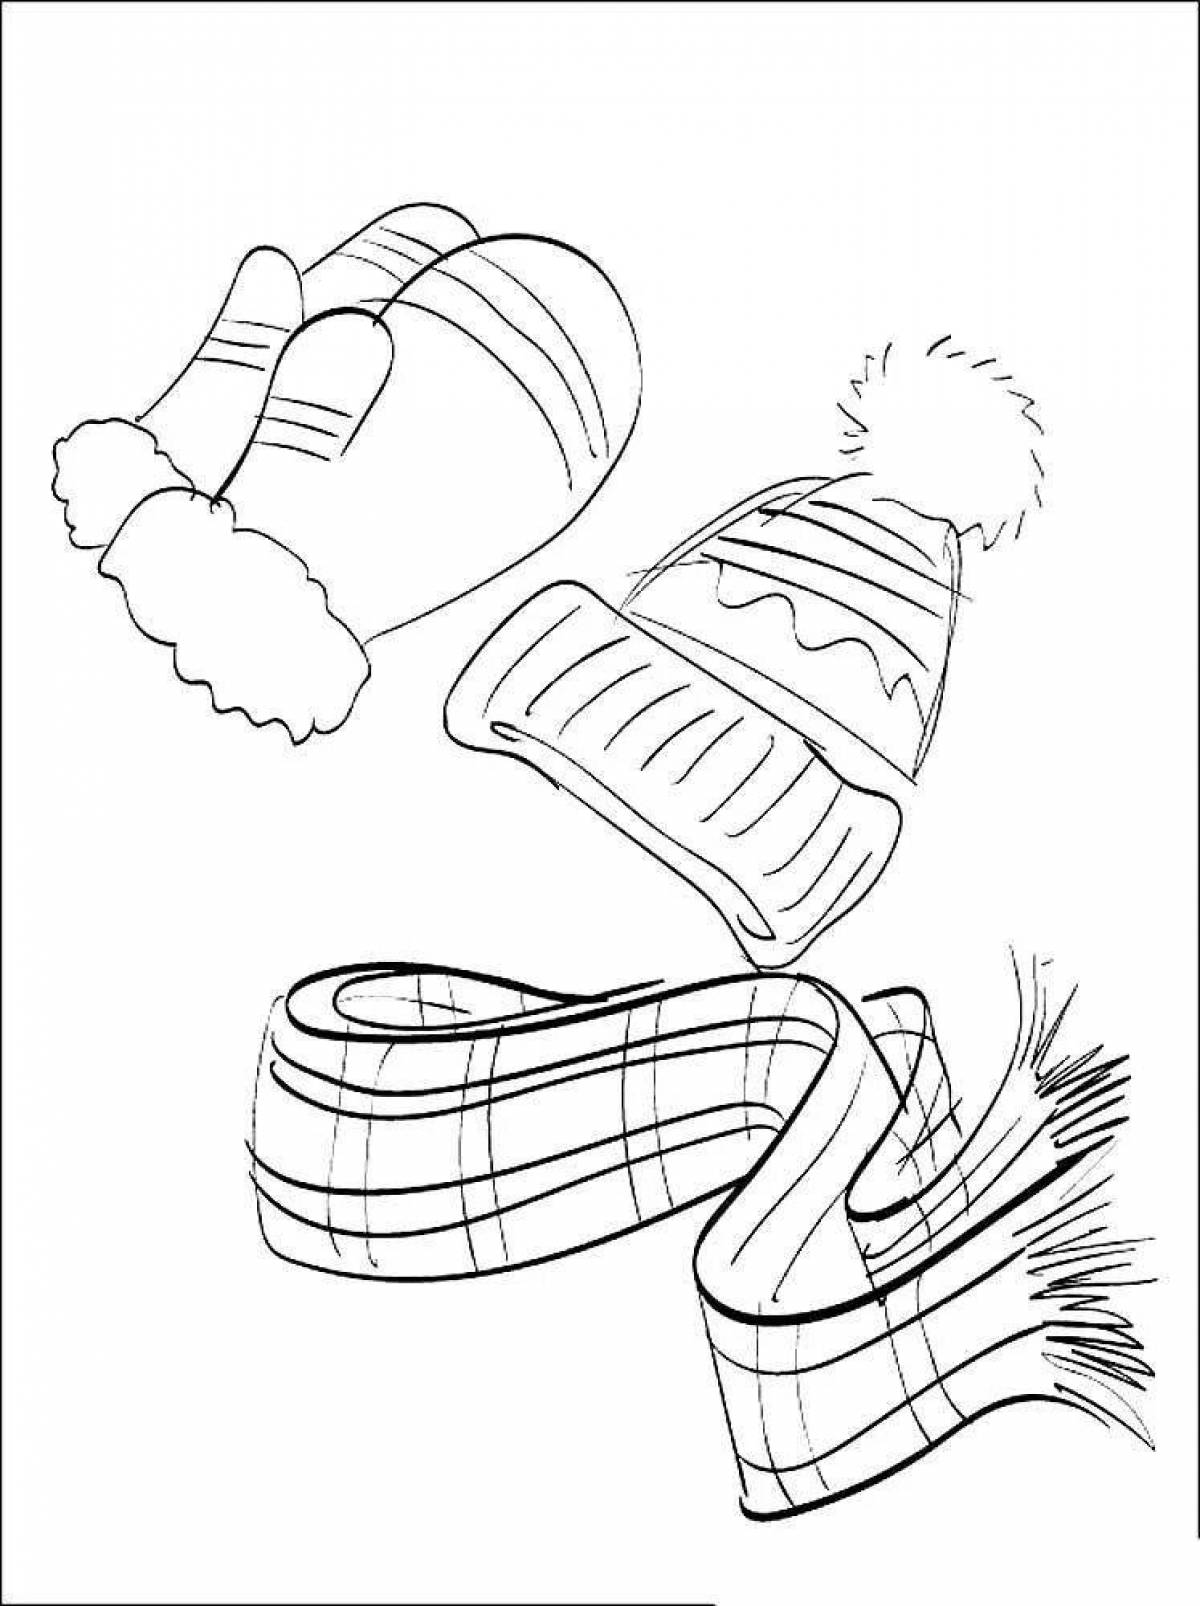 Coloring soft hat and mittens